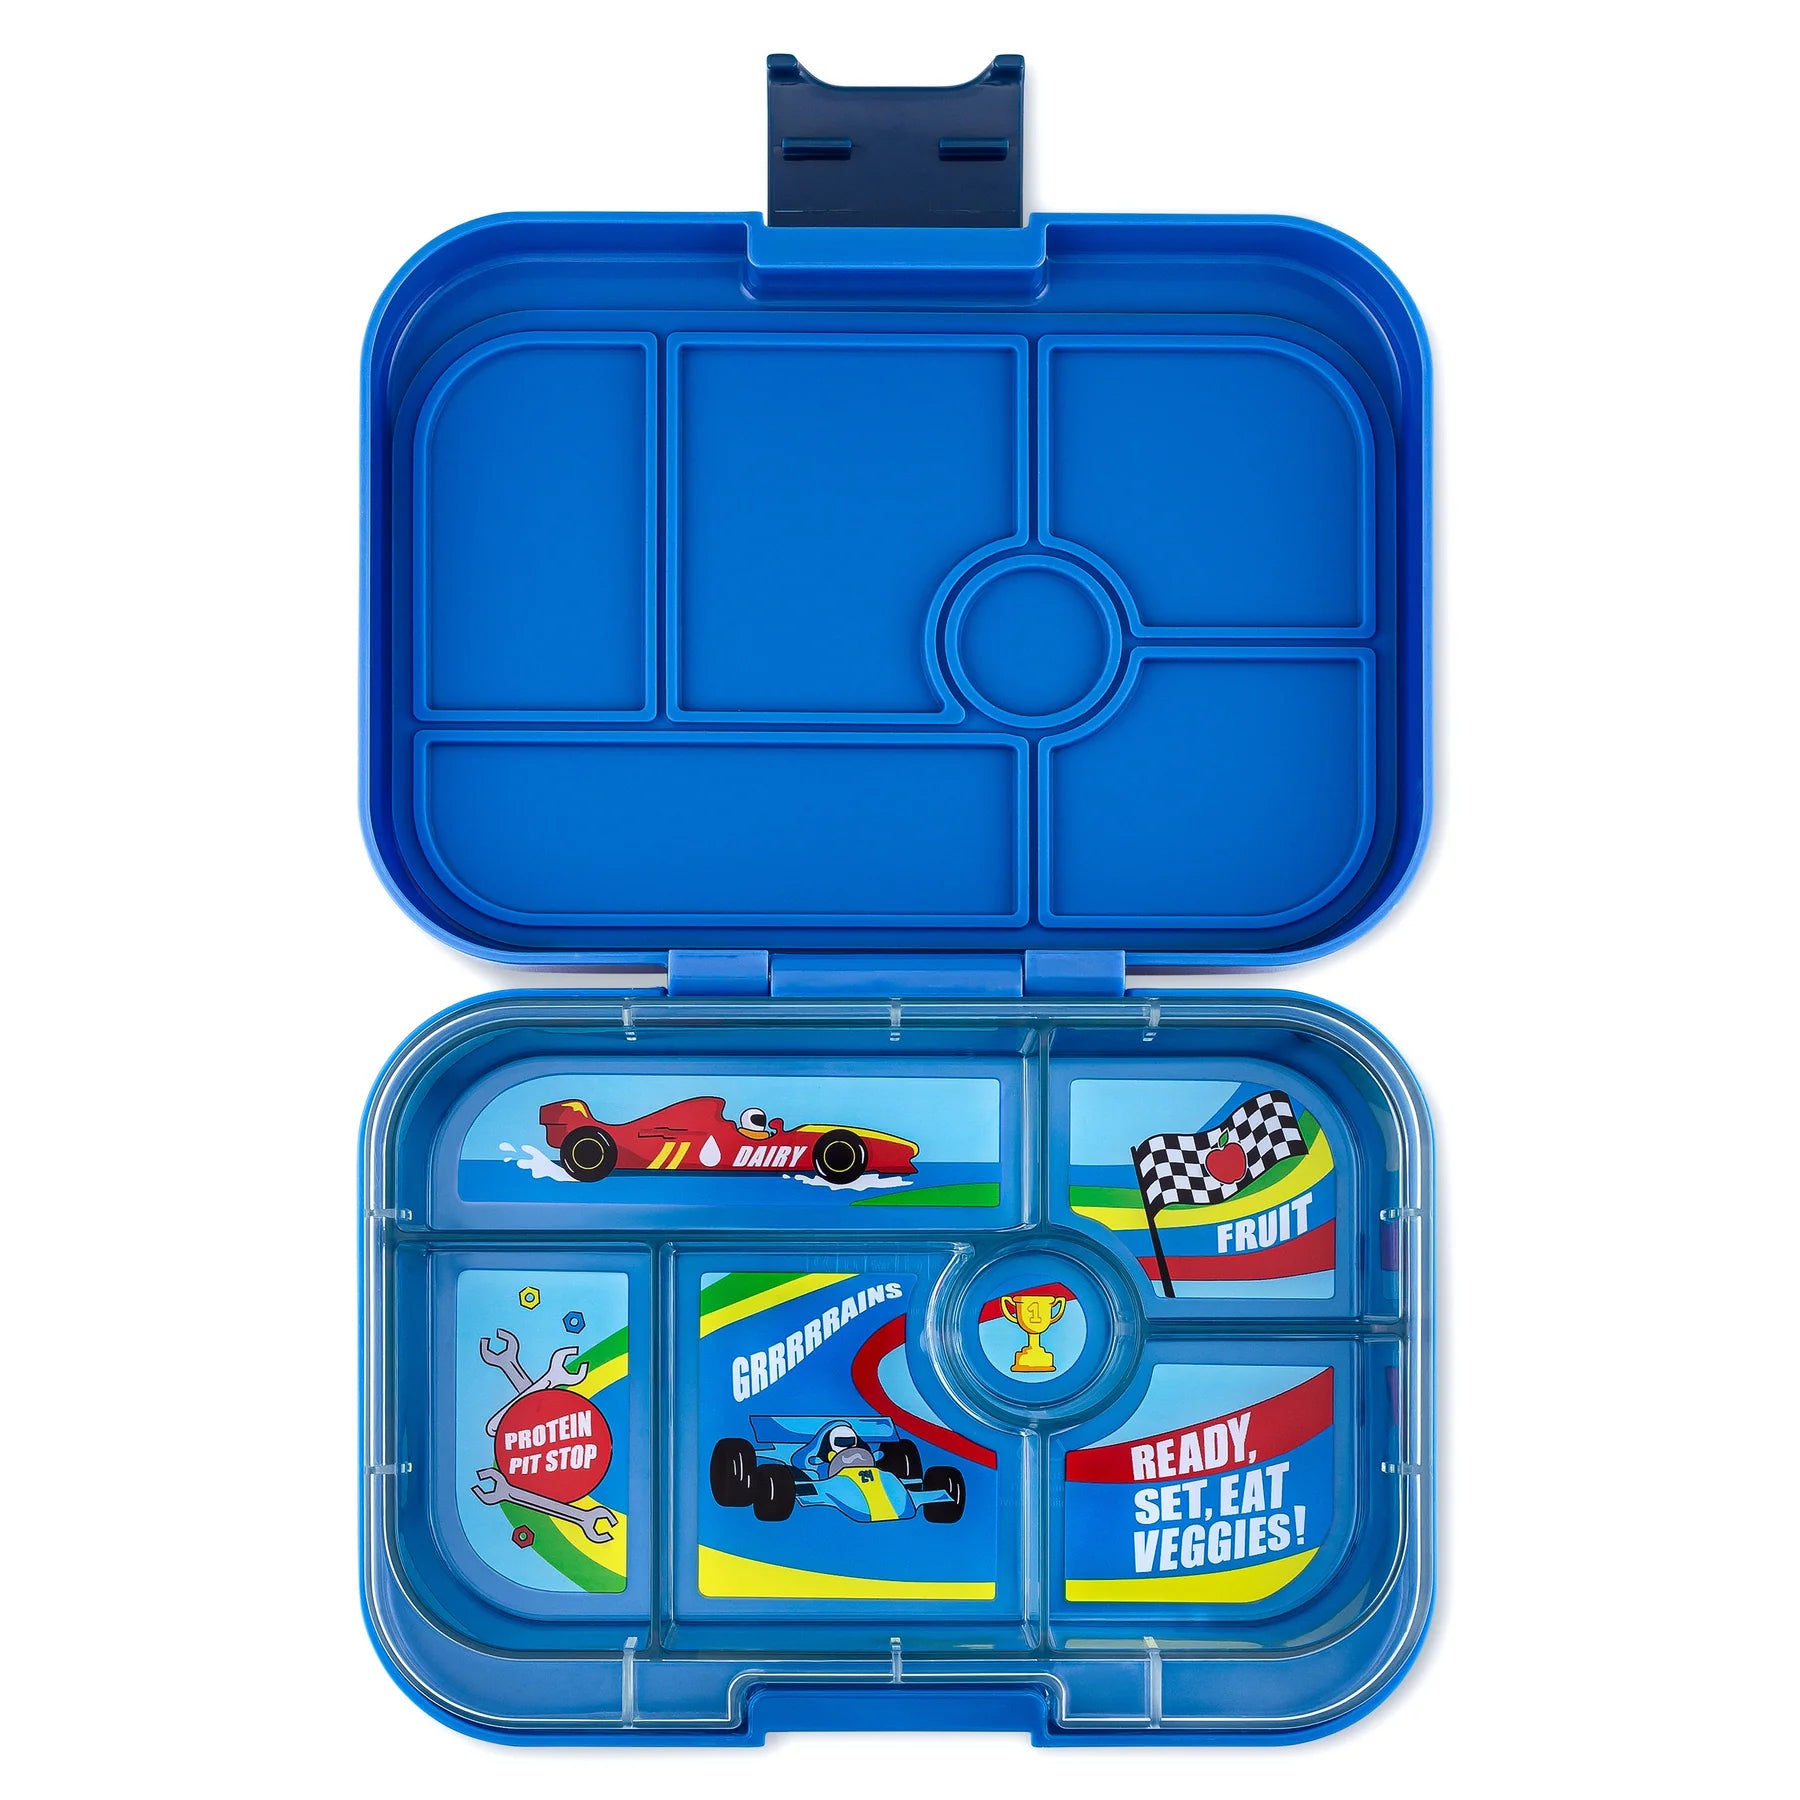 Yumbox Original 6-Compartment Food Tray - Surf Blue/Race Car Tray